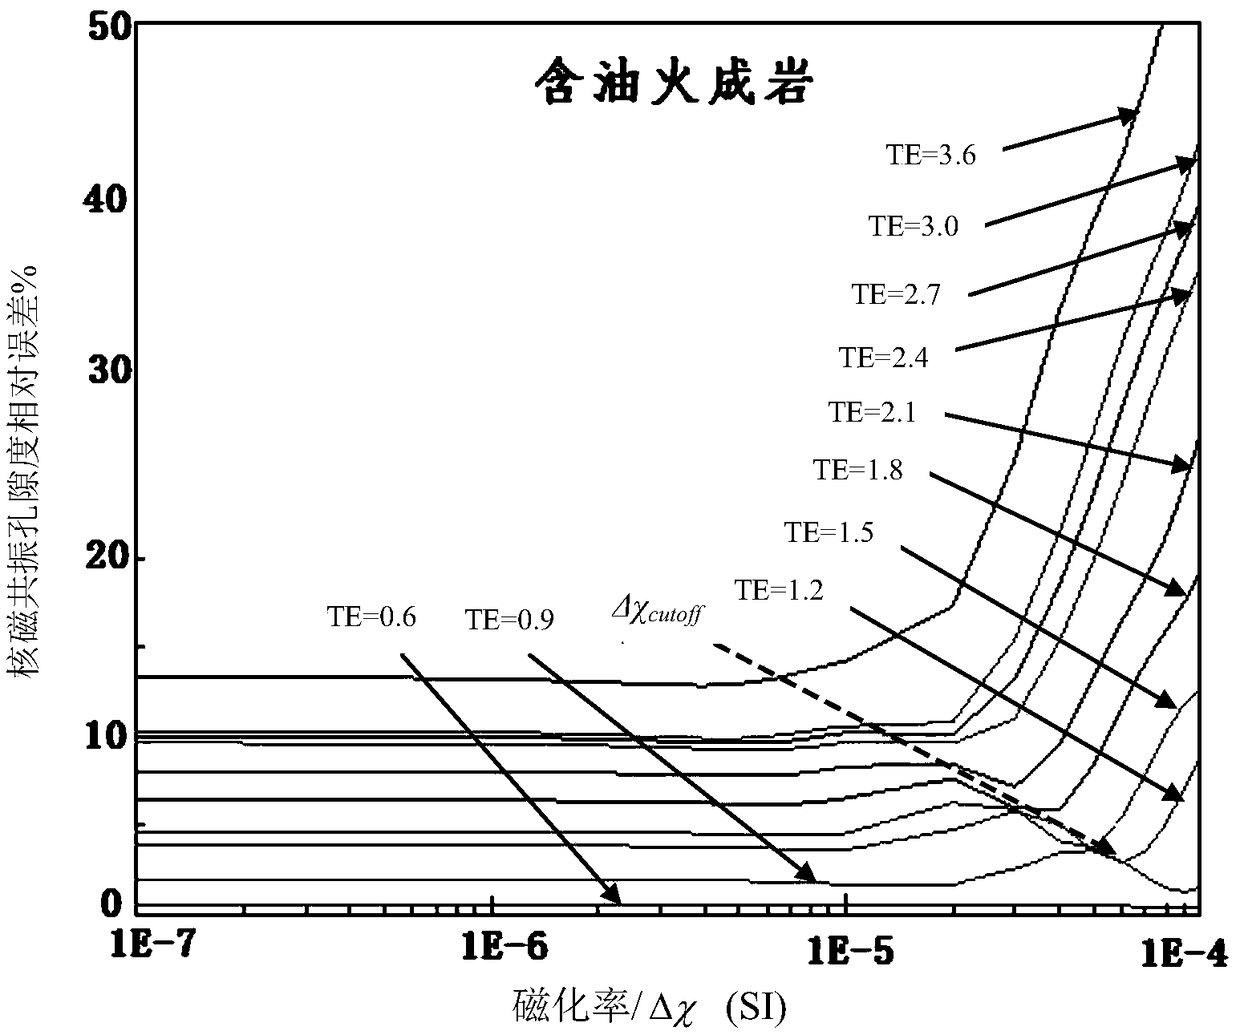 A method of correcting the NMR porosity of igneous rocks using a chart